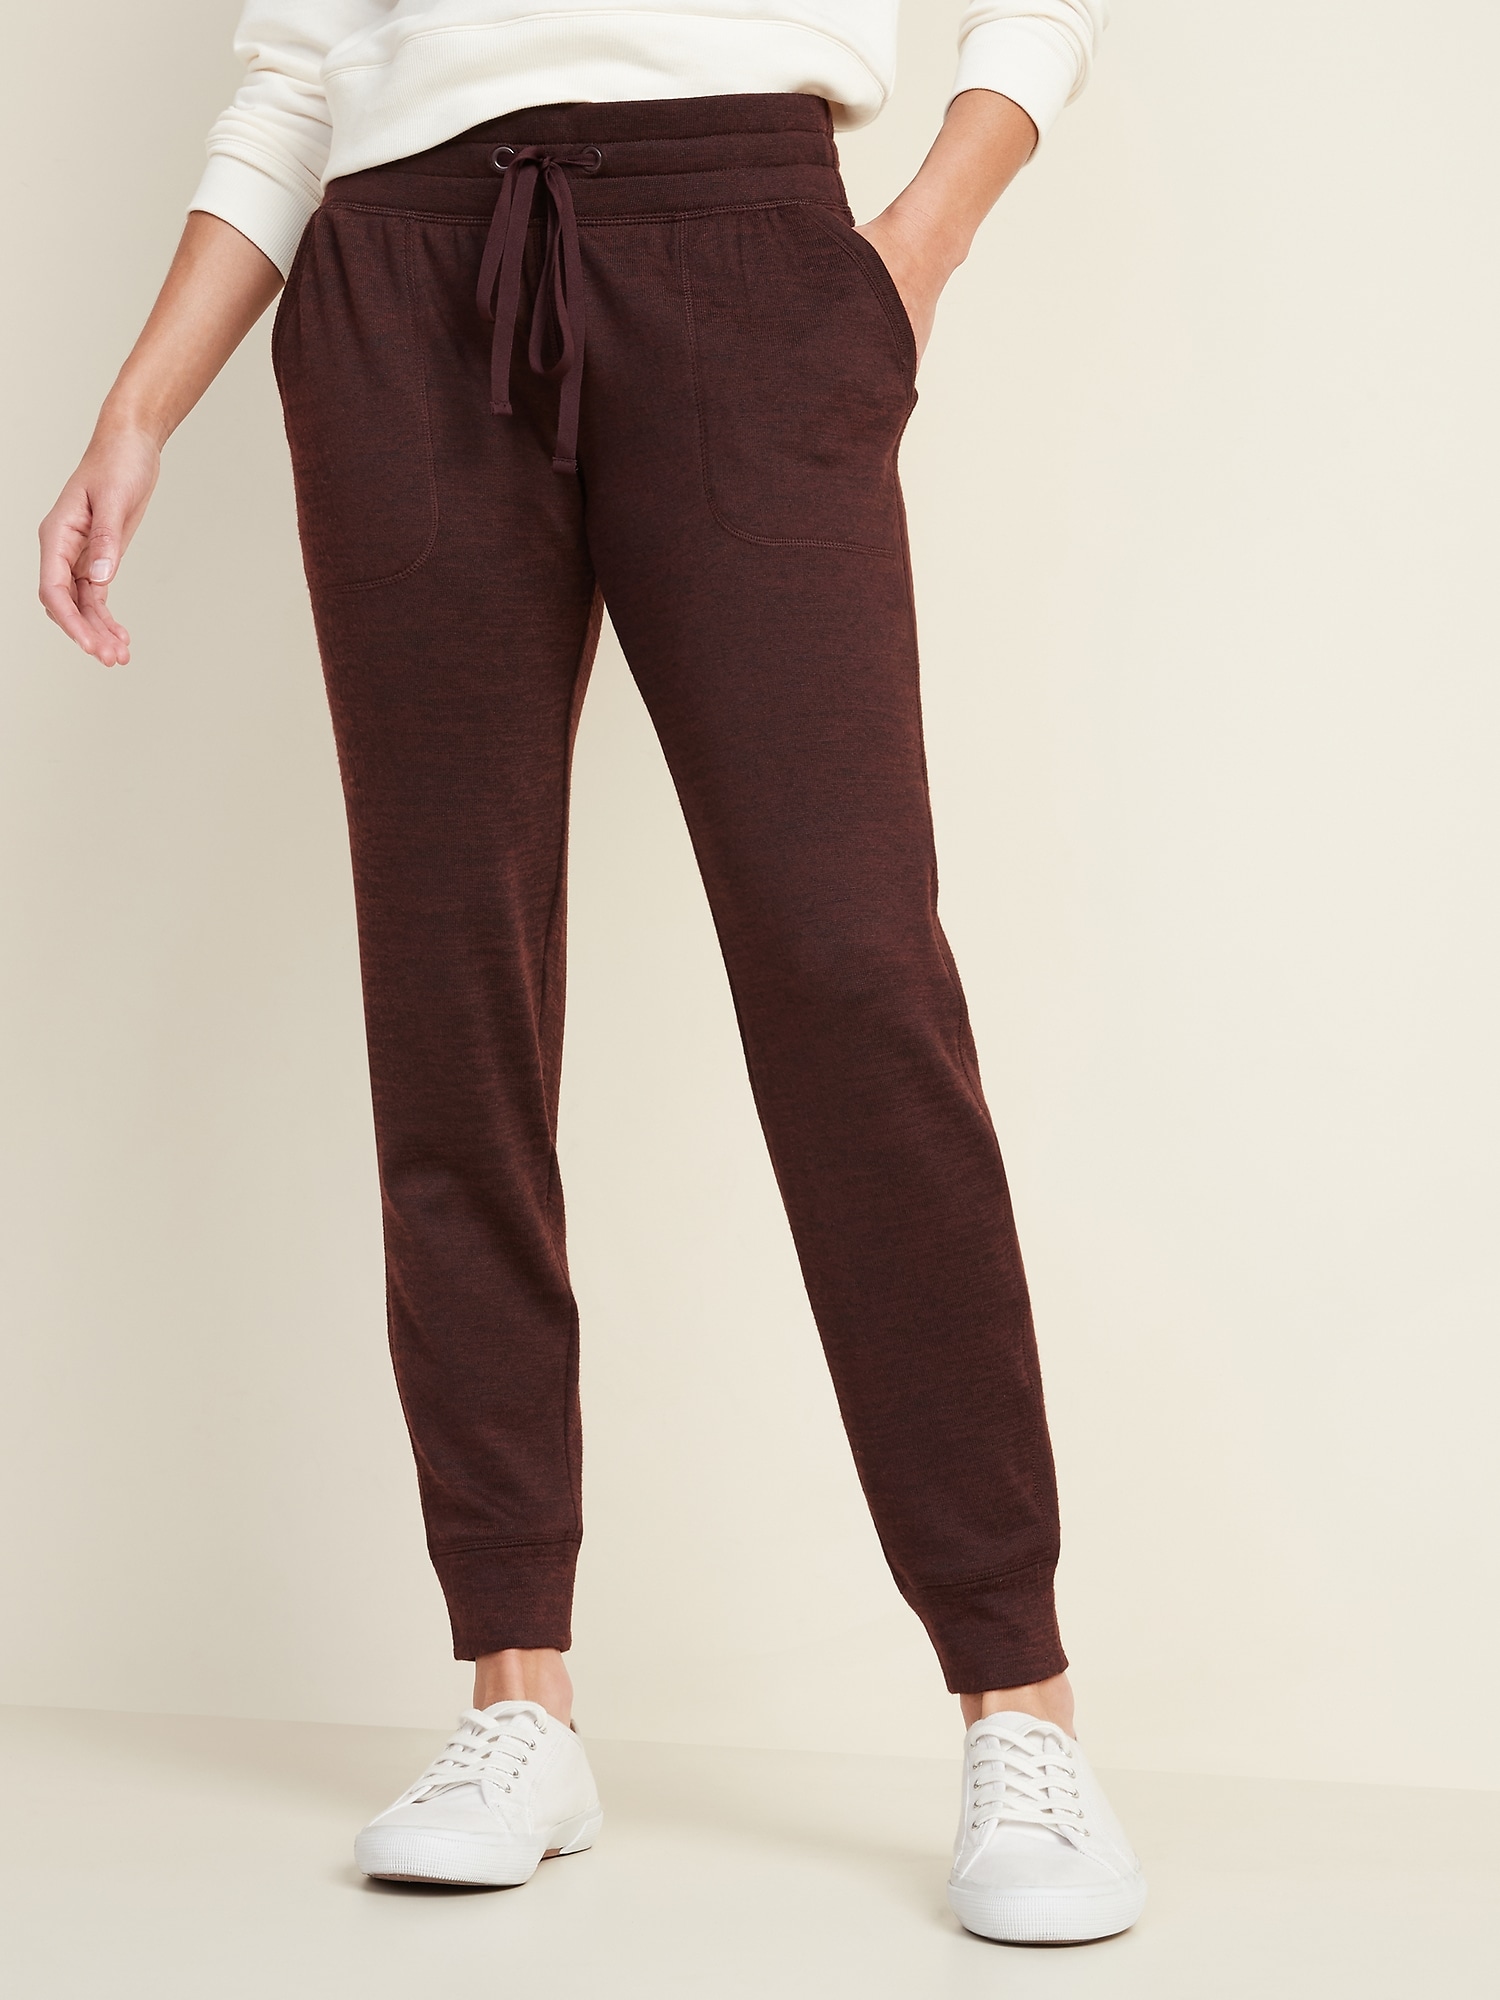 Mid-Rise Sweater-Knit Street Jogger Sweatpants for Women